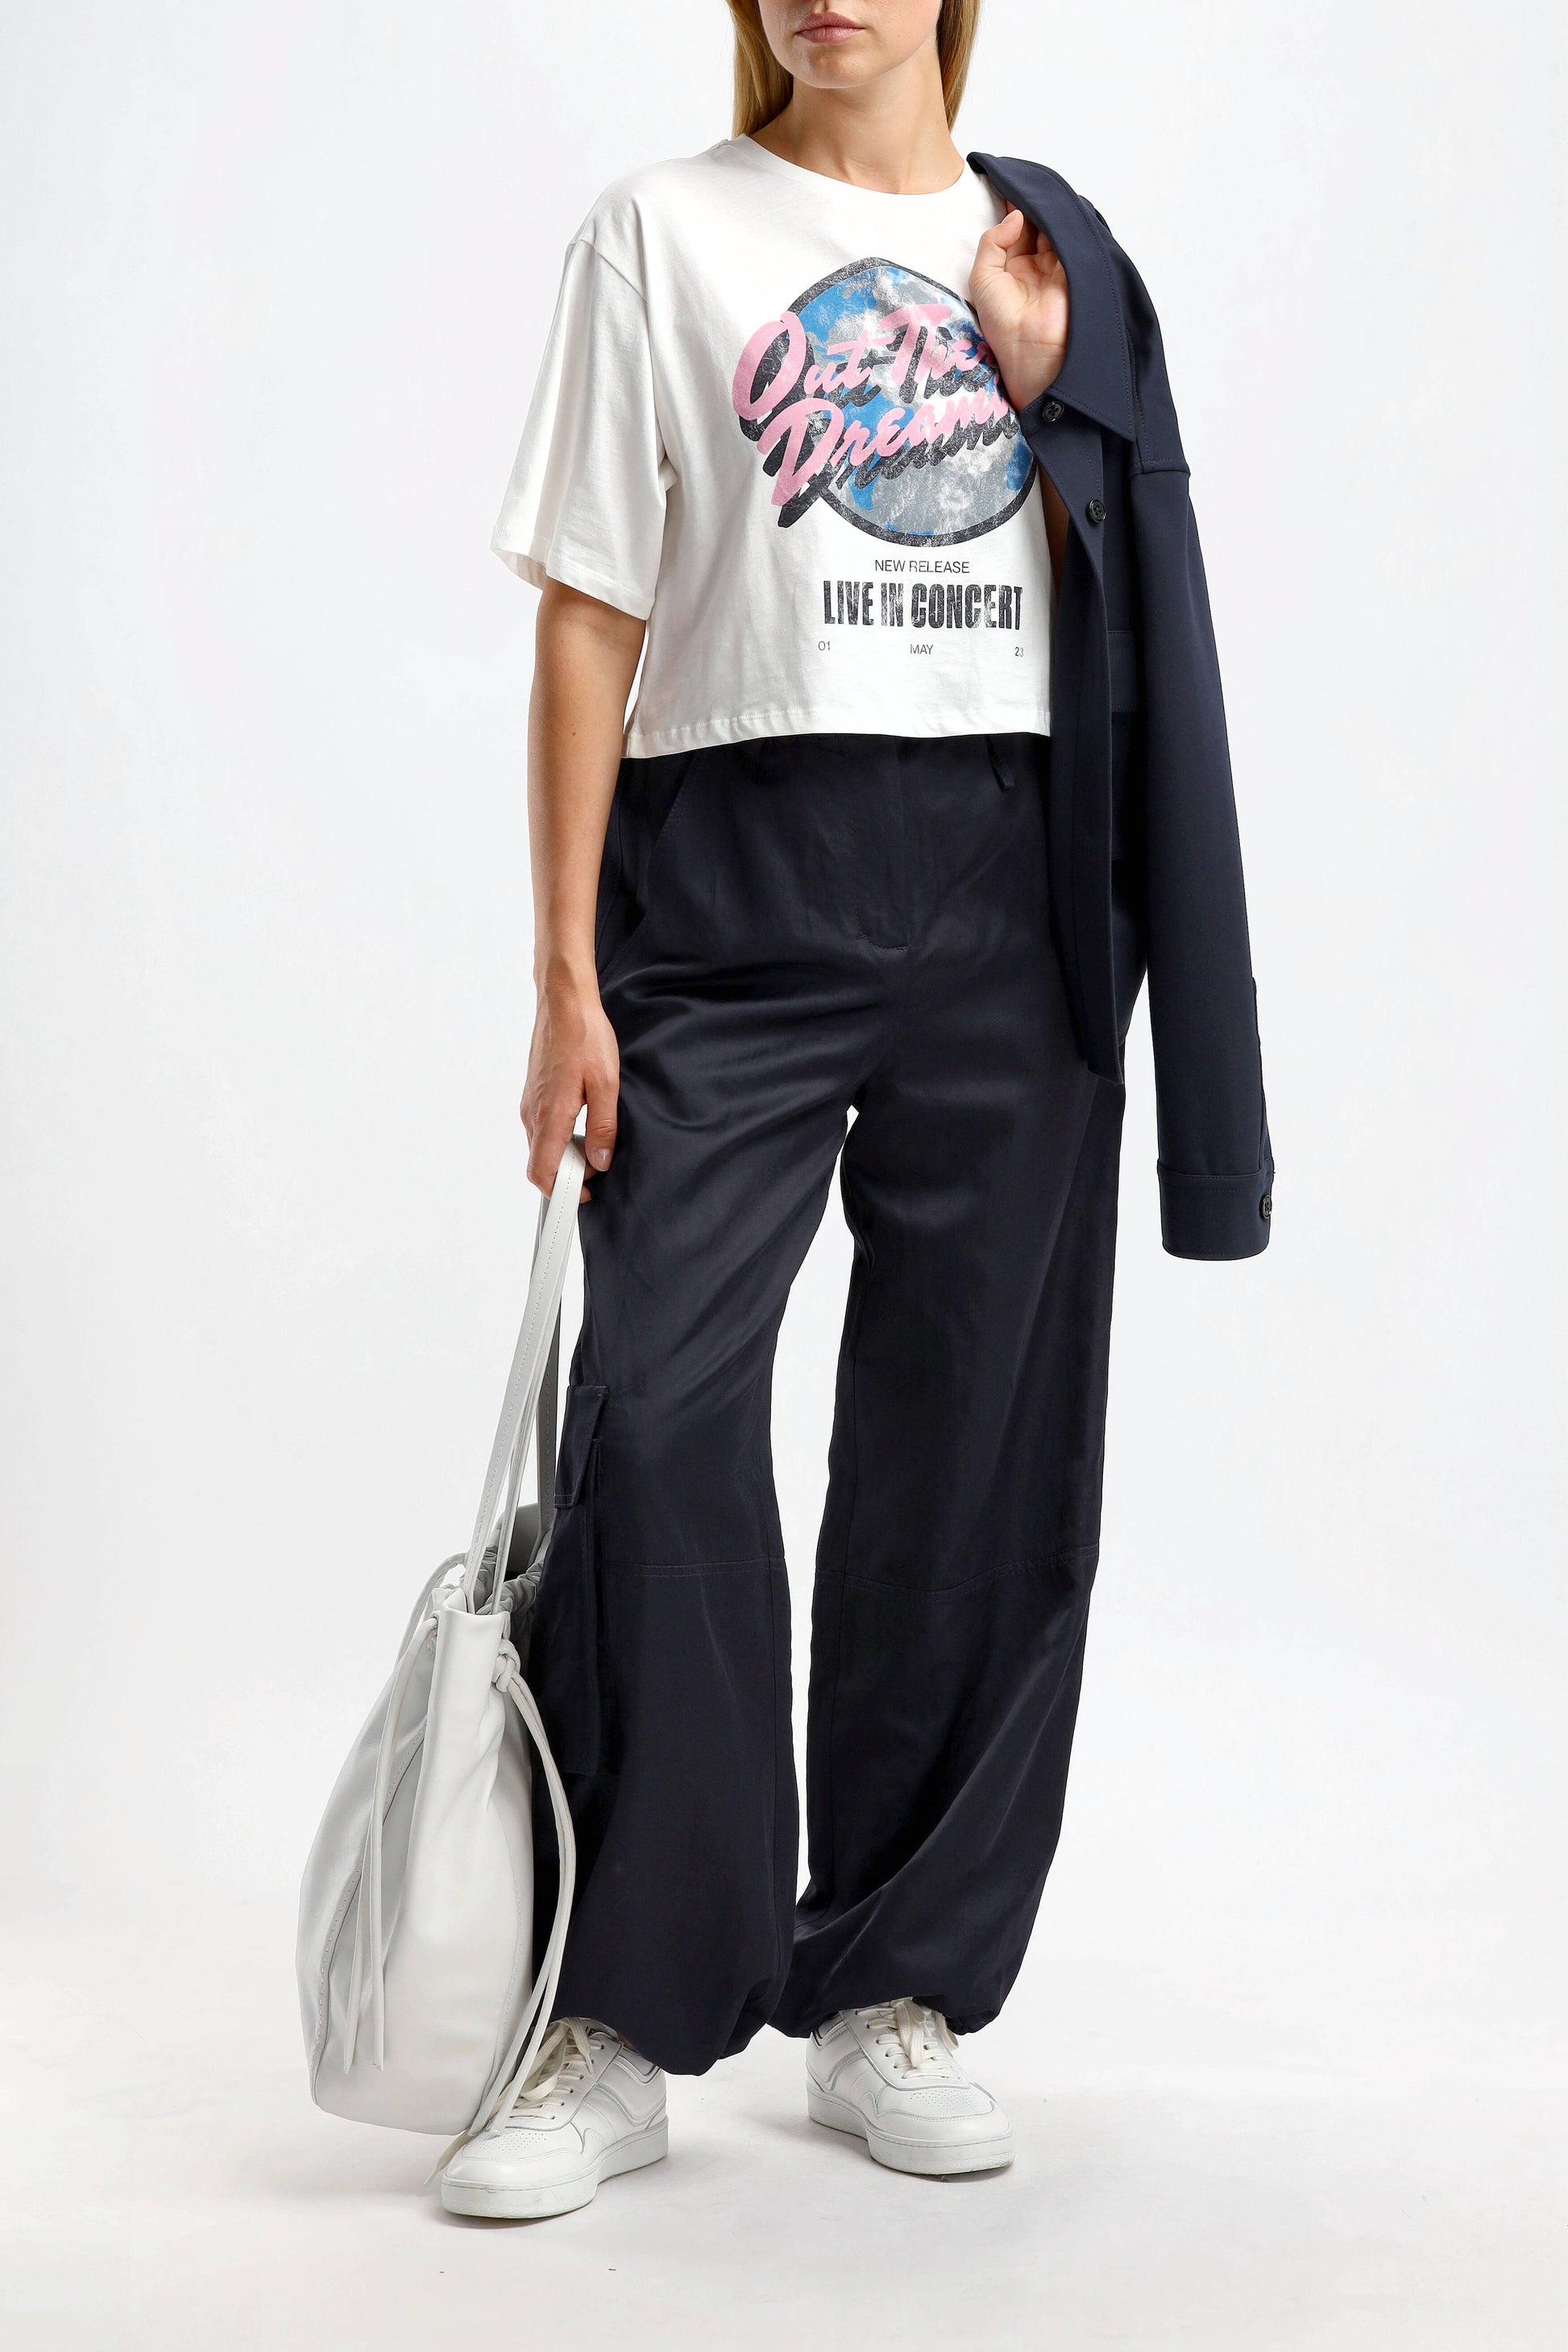 T-Shirt Dreaming in Camellia WhiteDorothee Schumacher - Anita Hass